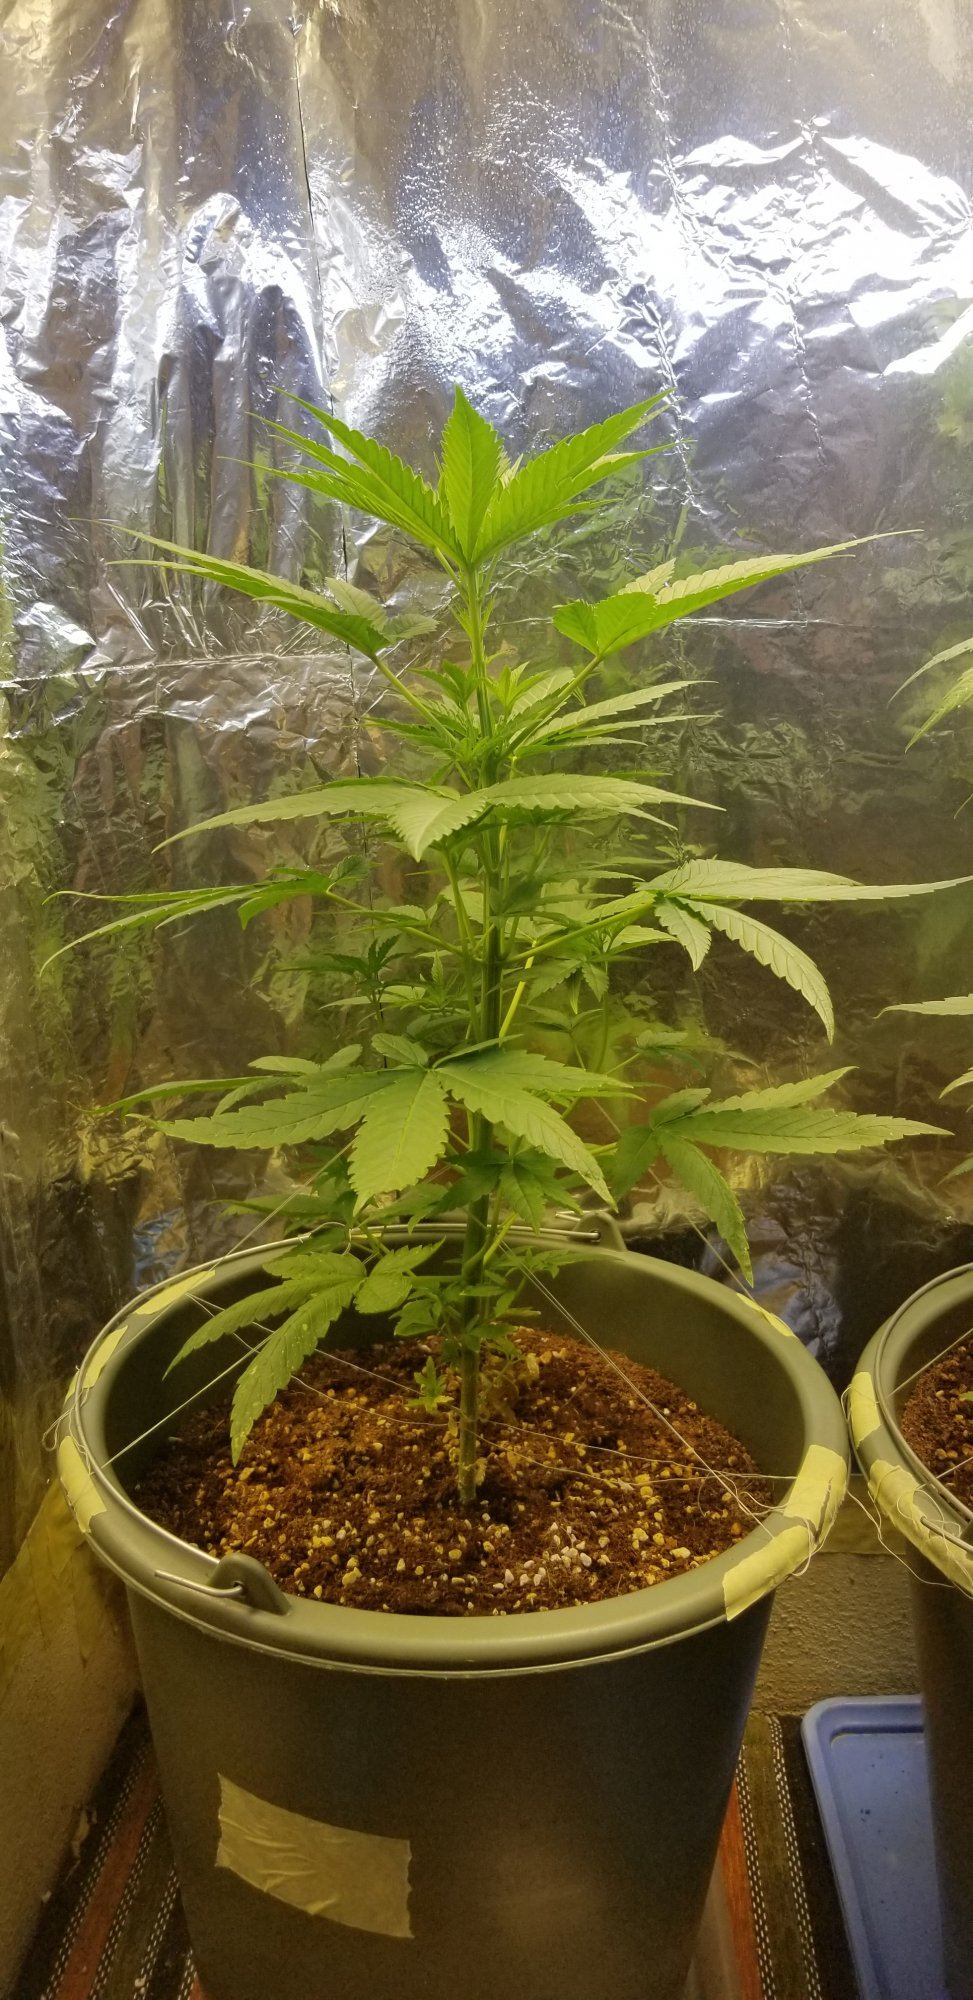 Cloning 1 month old plant